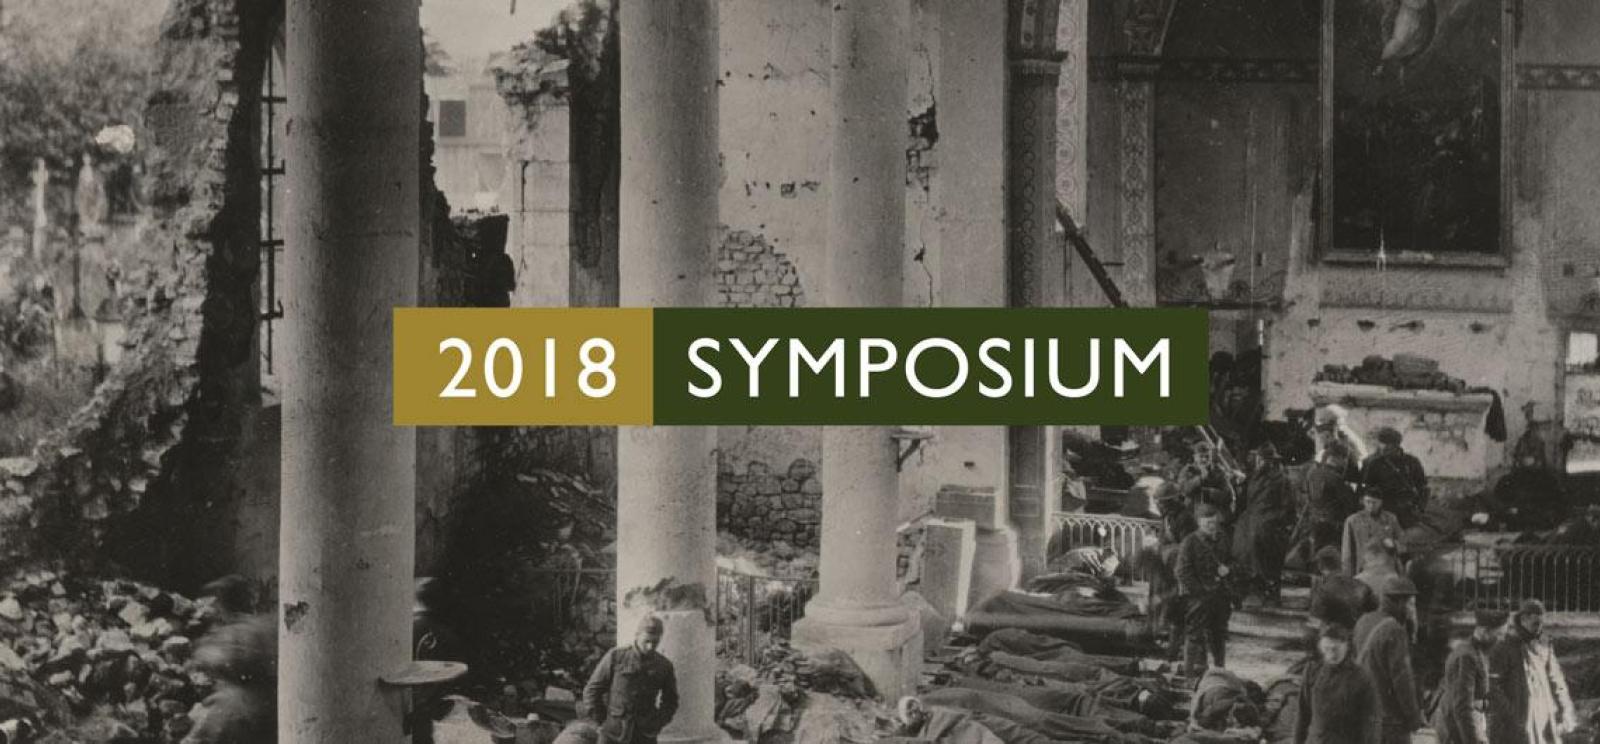 Background image: black and white hero of rows of soldiers/patients on pallets in a grand ruined building. Text: 2018 Symposium